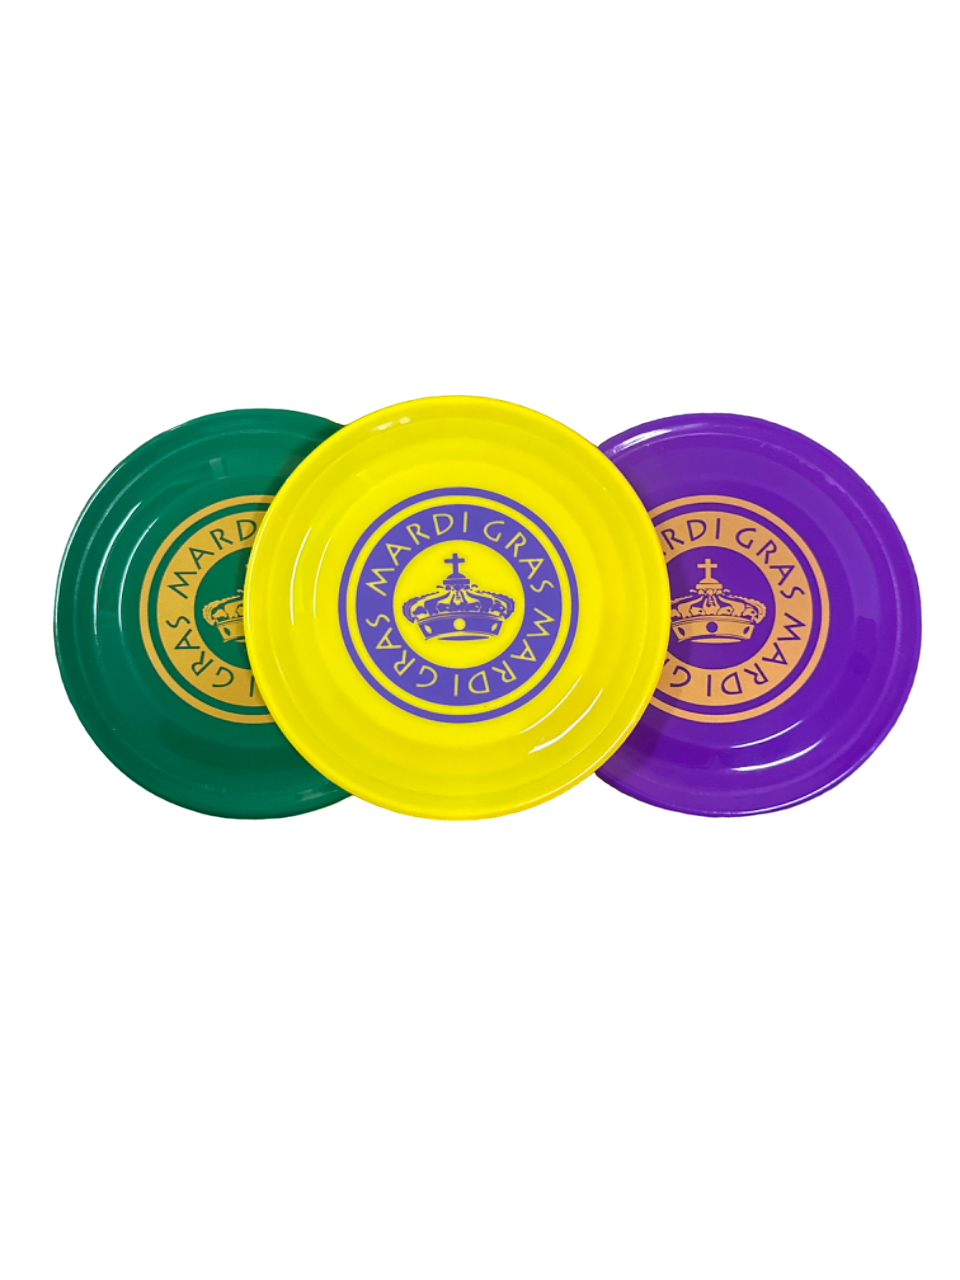 7" Purple, Green, and Gold Frisbees